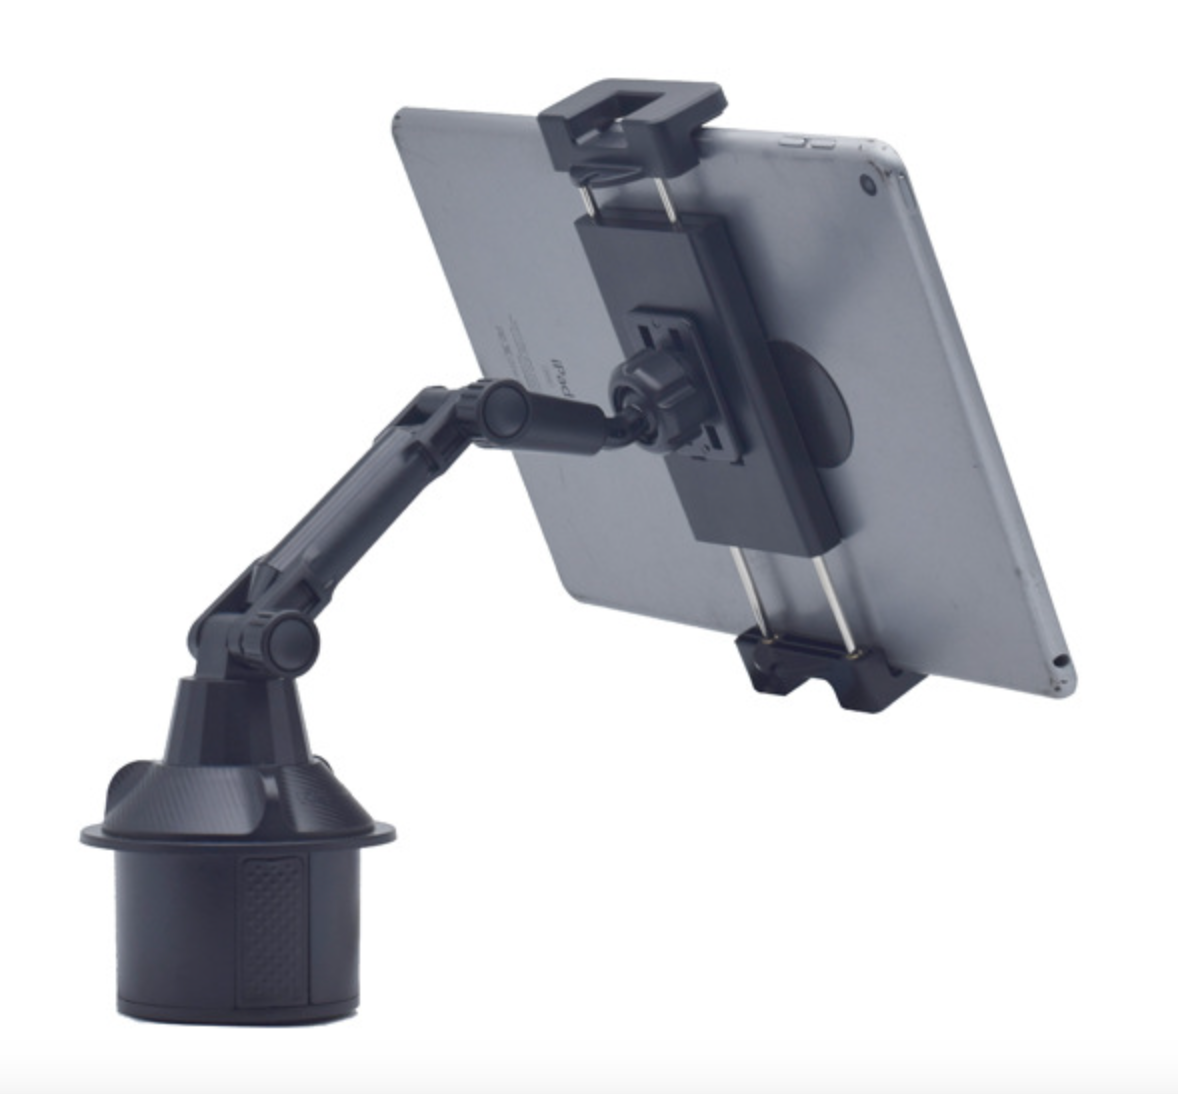 360° Adjustable Car Cup Holder Stand Mount Smarphone Stand for 4 to 13" Tablet